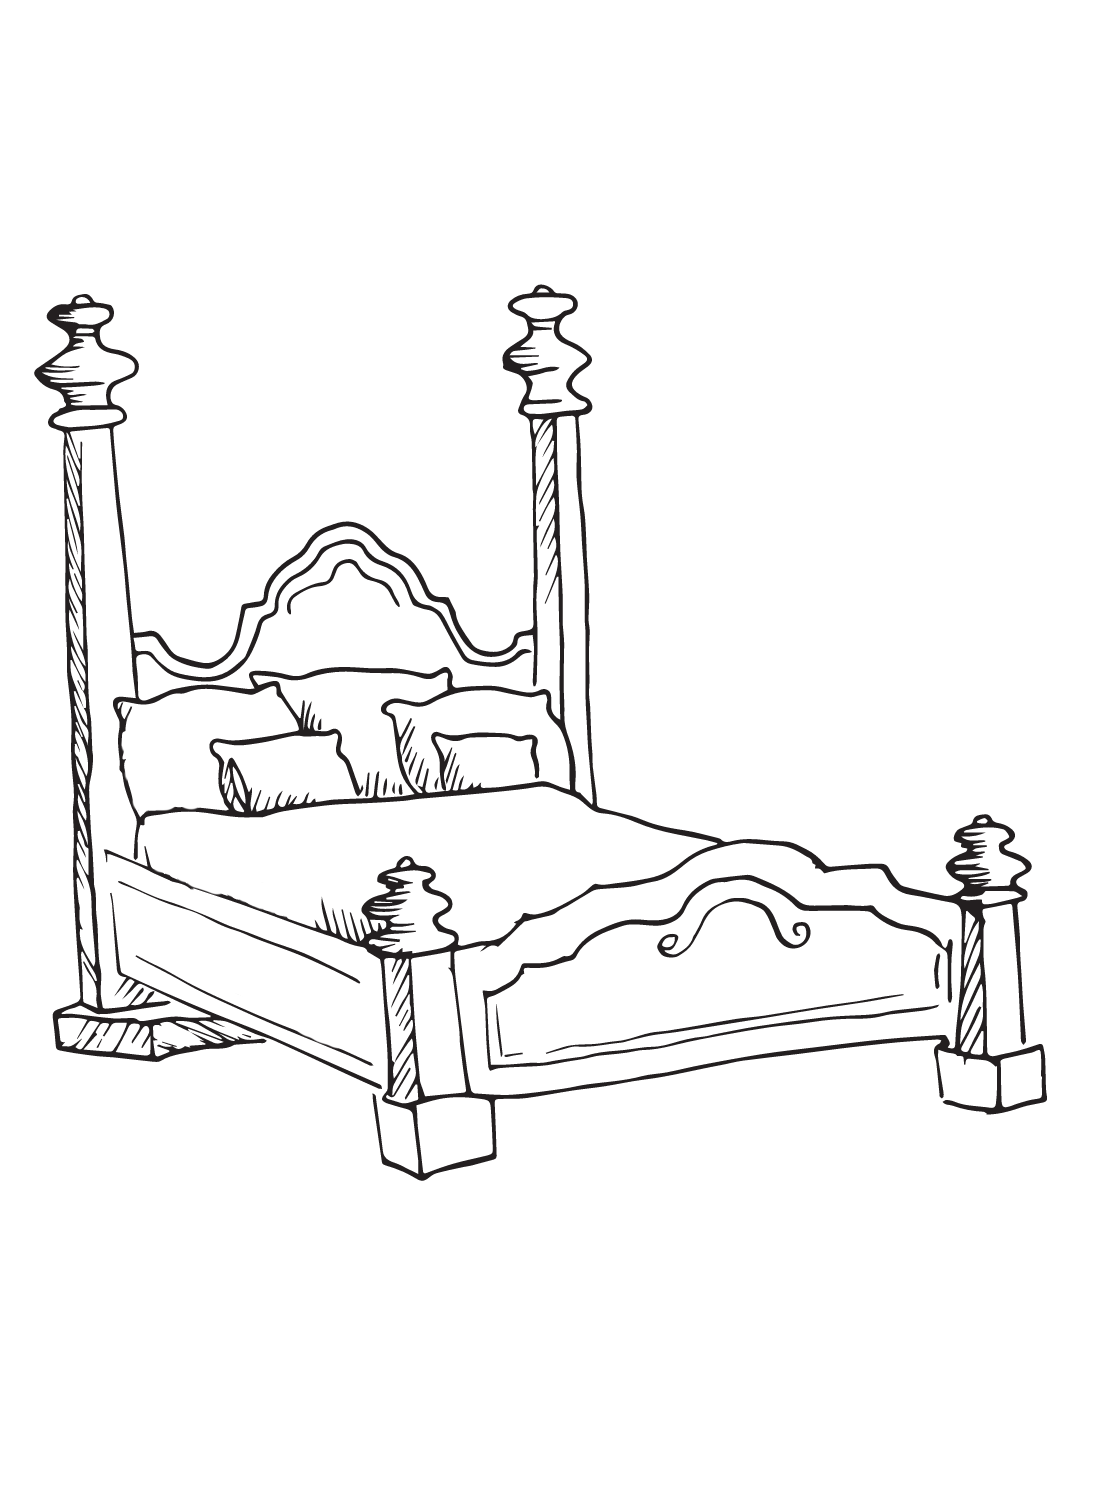 Bed Printable from Bed